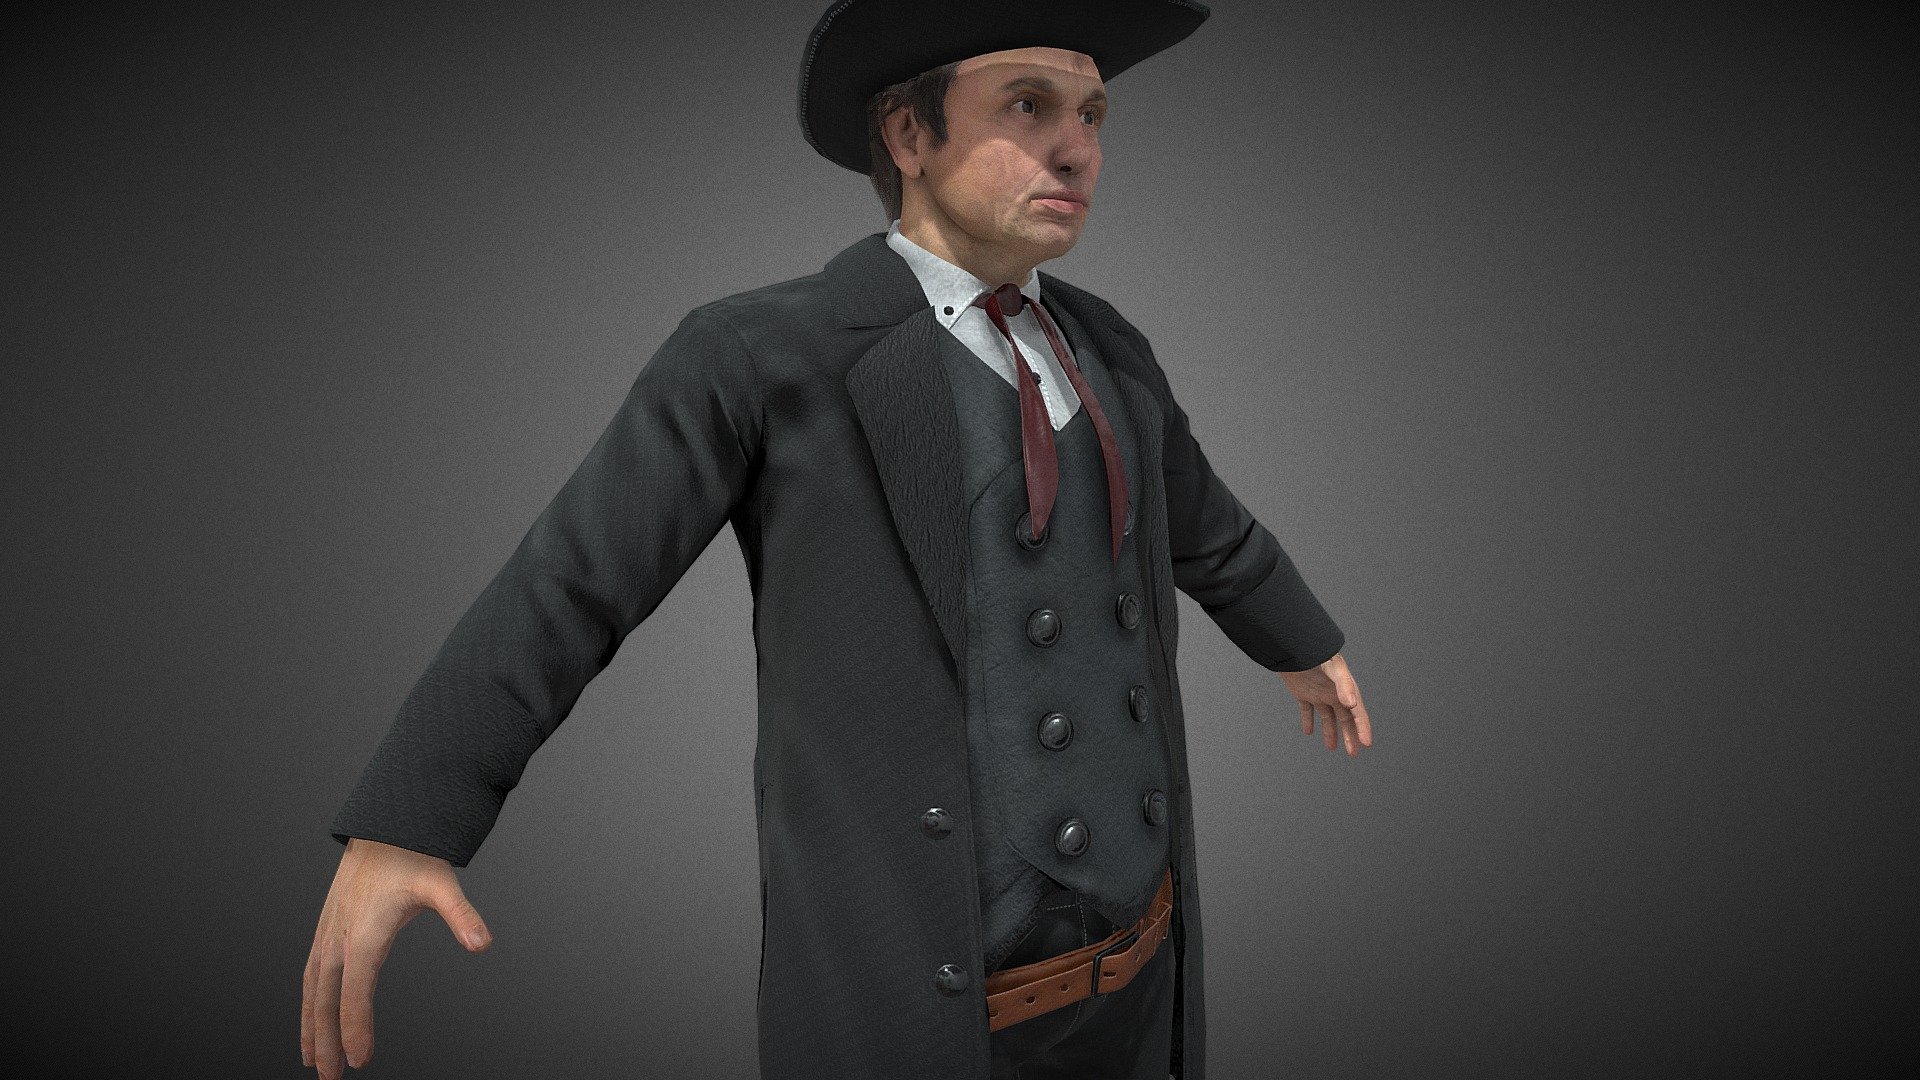 CG StudioX Present :
Cowboy Character lowpoly/PBR




This is Cowboy Character  Comes with Specular and Metalness PBR.

The photo been rendered using Marmoset Toolbag 3 (real time game engine )


Features :



Comes with Specular and Metalness PBR 4K texture .

Good topology.

Low polygon geometry.

The Model is prefect for game for both Specular workflow as in Unity and Metalness as in Unreal engine .

The model also rendered using Marmoset Toolbag 4 with both Specular and Metalness PBR and also included in the product with the full texture.

The texture can be easily adjustable .


Texture :



11 set of UV for (Jeans-Coat-Hand-Hat-Vest-Shirt-Head-Eyelashes-Eyes-Cap-Hair) [Albedo -Normal-Metalness -Roughness-Gloss-Specular-Ao] (4096*4096) 


Files :
Marmoset Toolbag 3 ,Maya,,FBX,,OBj with all the textures.




Contact me for if you have any questions.
 - Cowboy Character - Buy Royalty Free 3D model by CG StudioX (@CG_StudioX) 3d model